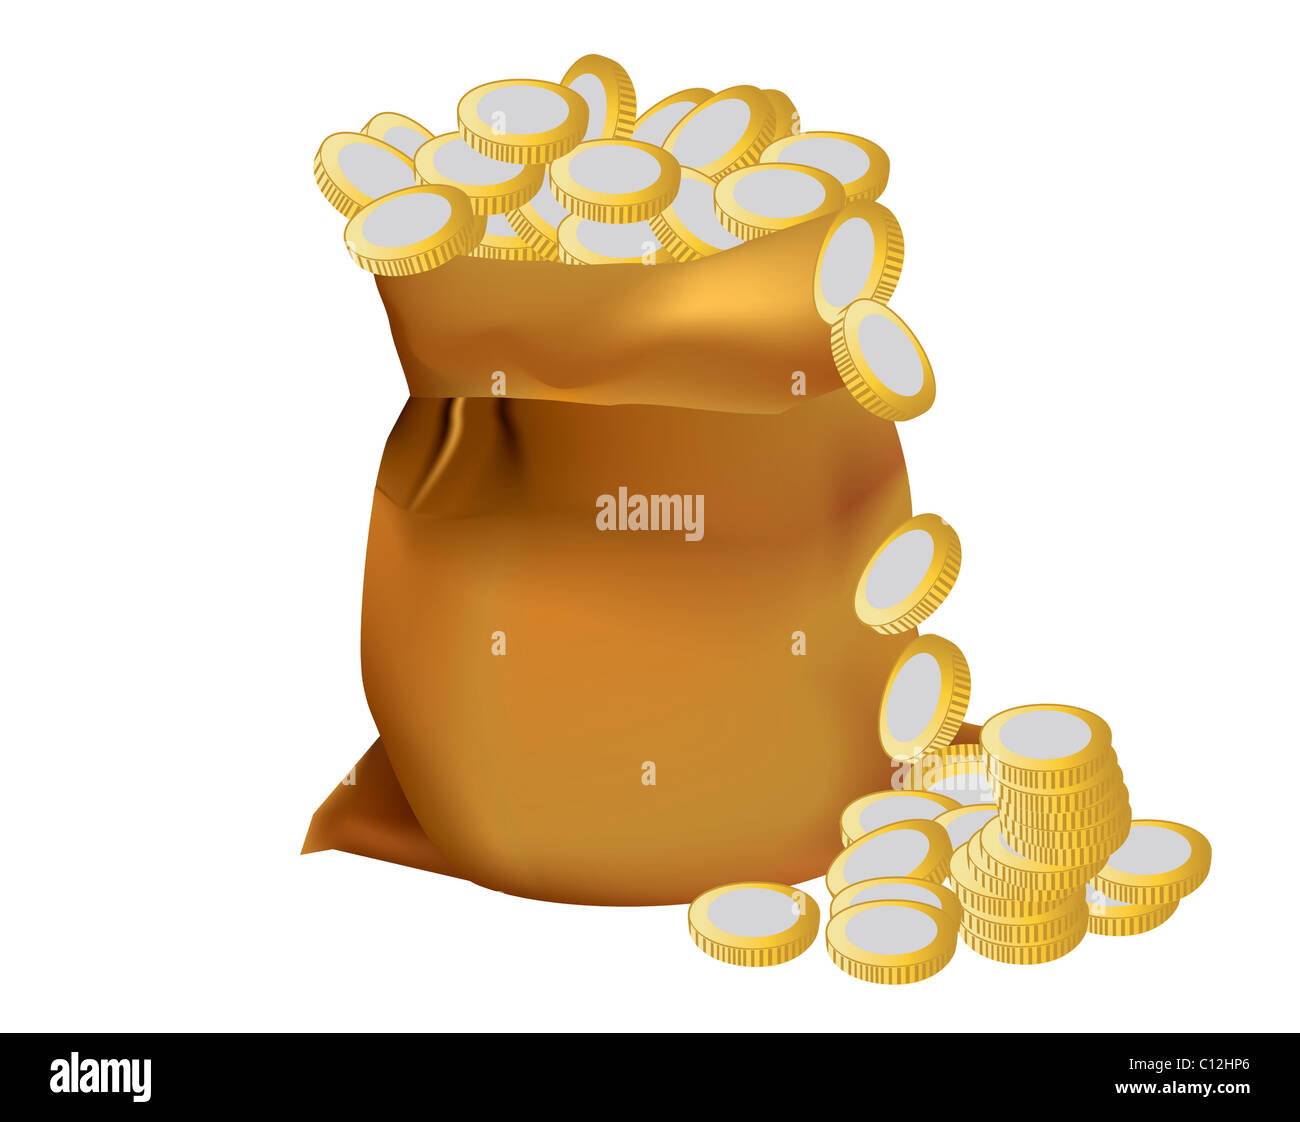 Money bag pounds Cut Out Stock Images & Pictures - Alamy